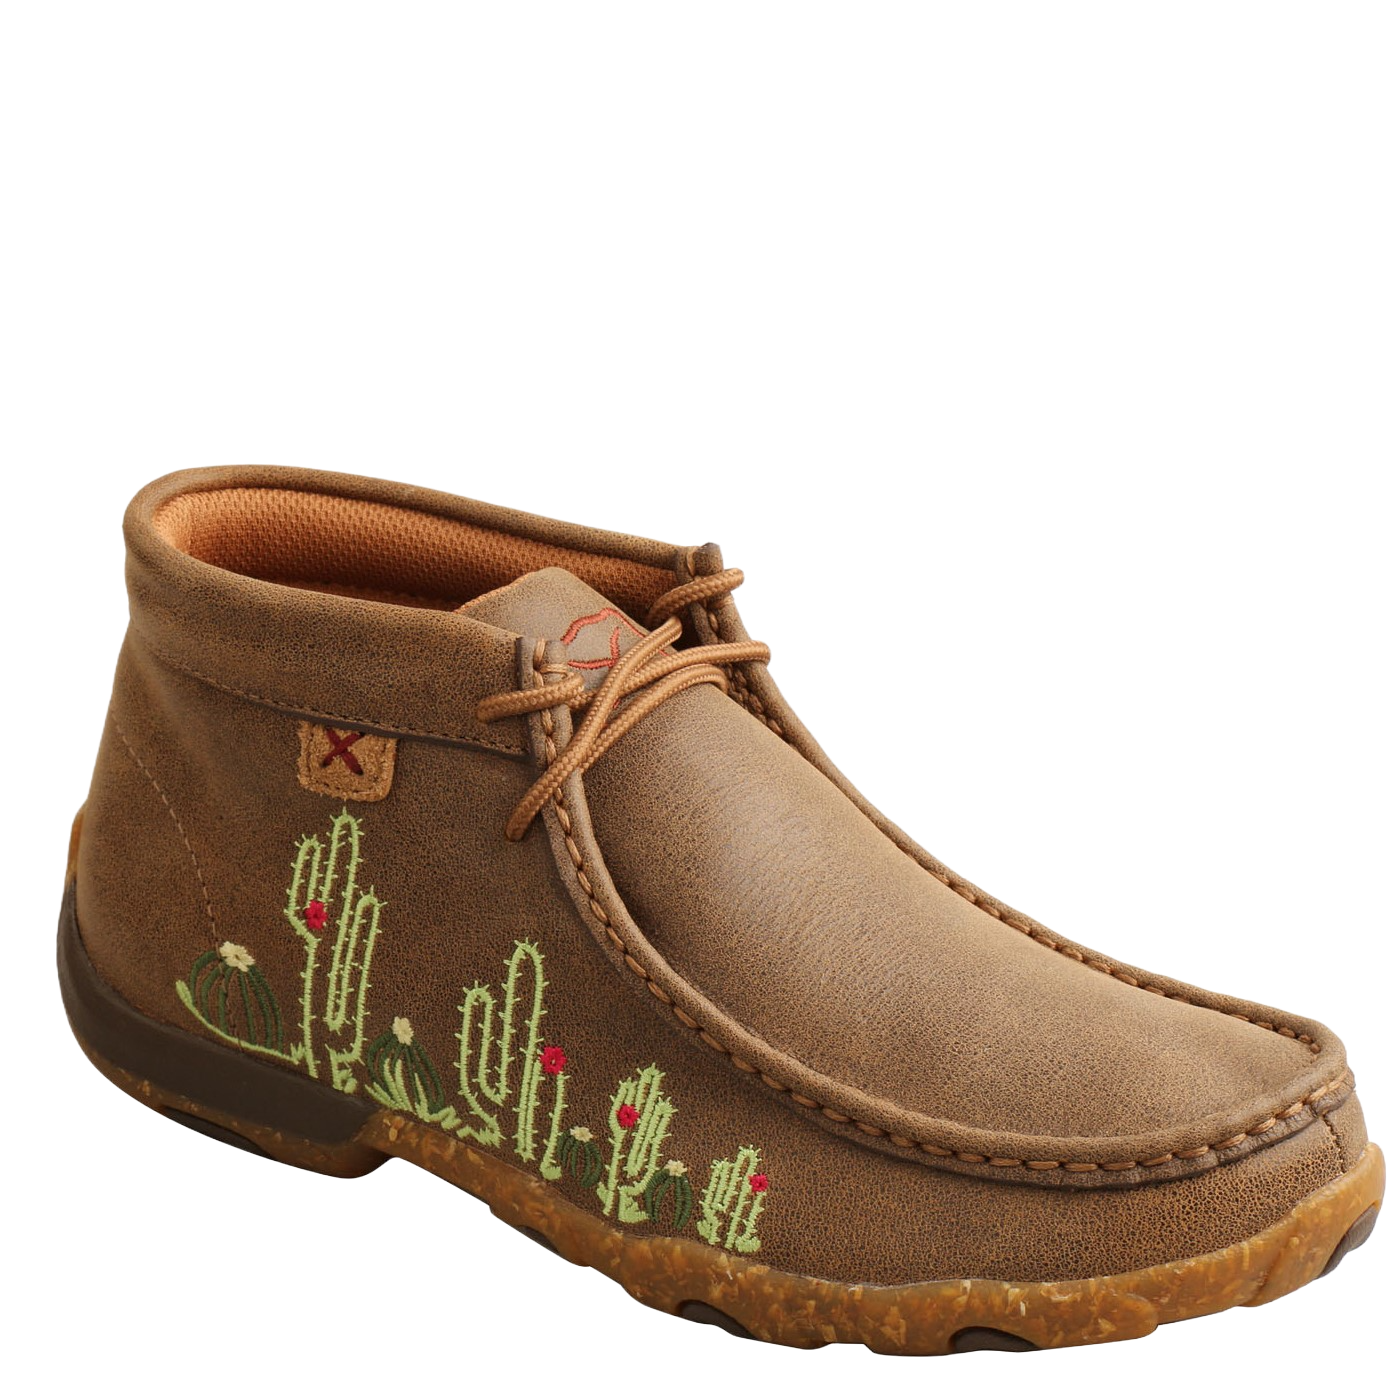 Twisted X Ladies Chukka Driving Moc Cactus Embroidery Shoes WDM0145